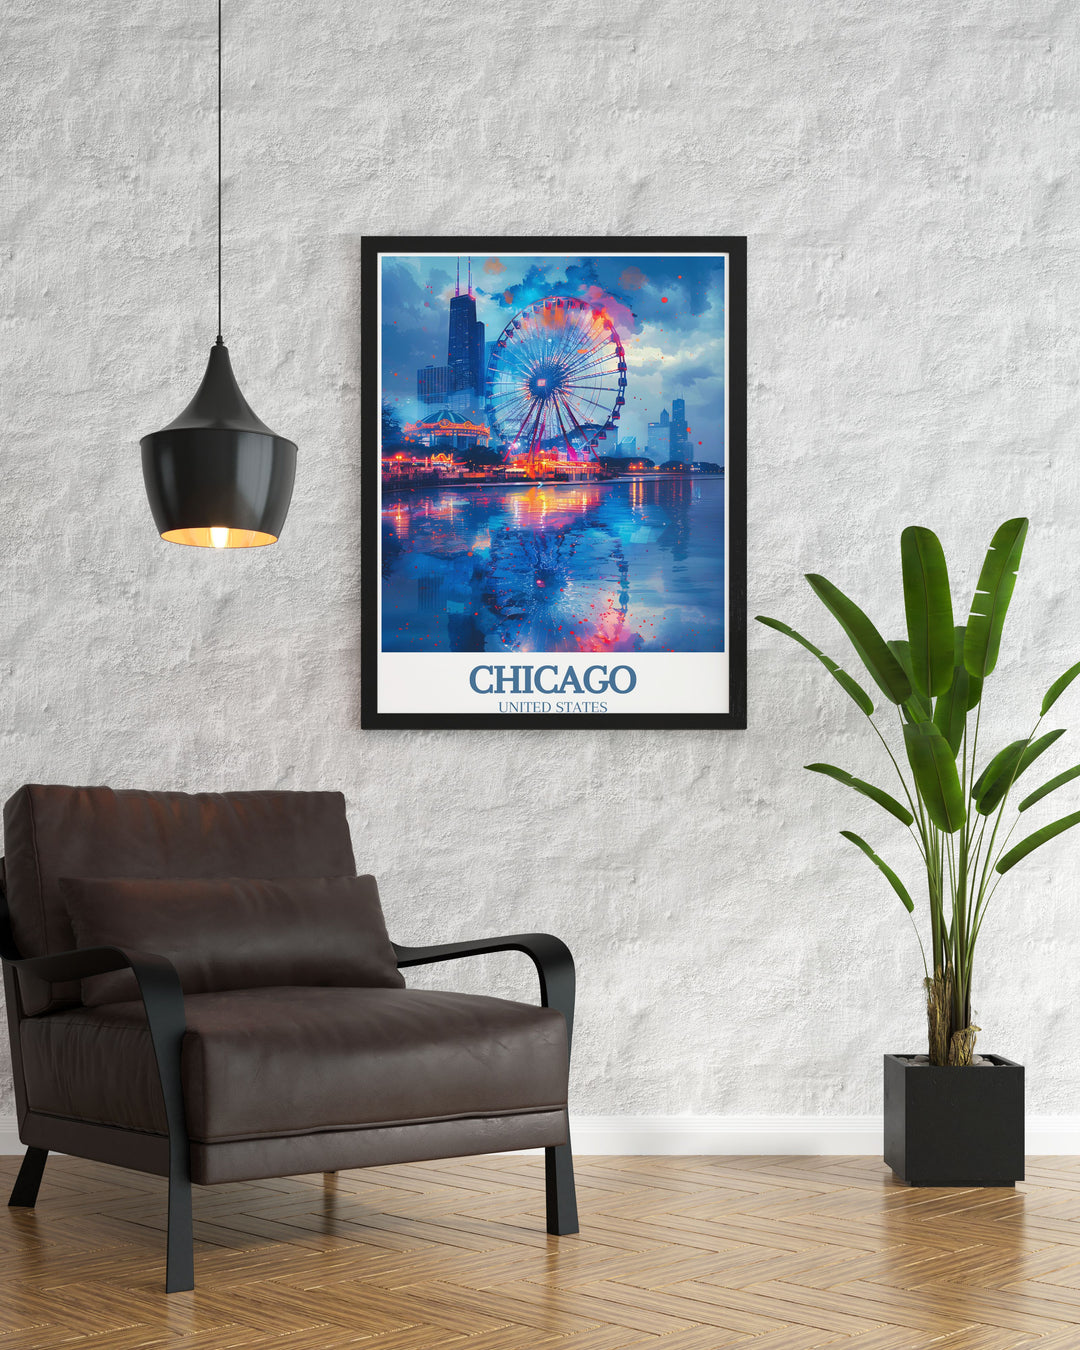 This Chicago travel poster brings the energetic scenes of Navy Pier to life, perfect for those who love urban landscapes. Featuring the towering Centennial Wheel, this travel poster is perfect for those who appreciate Chicagos scenic and cultural richness.